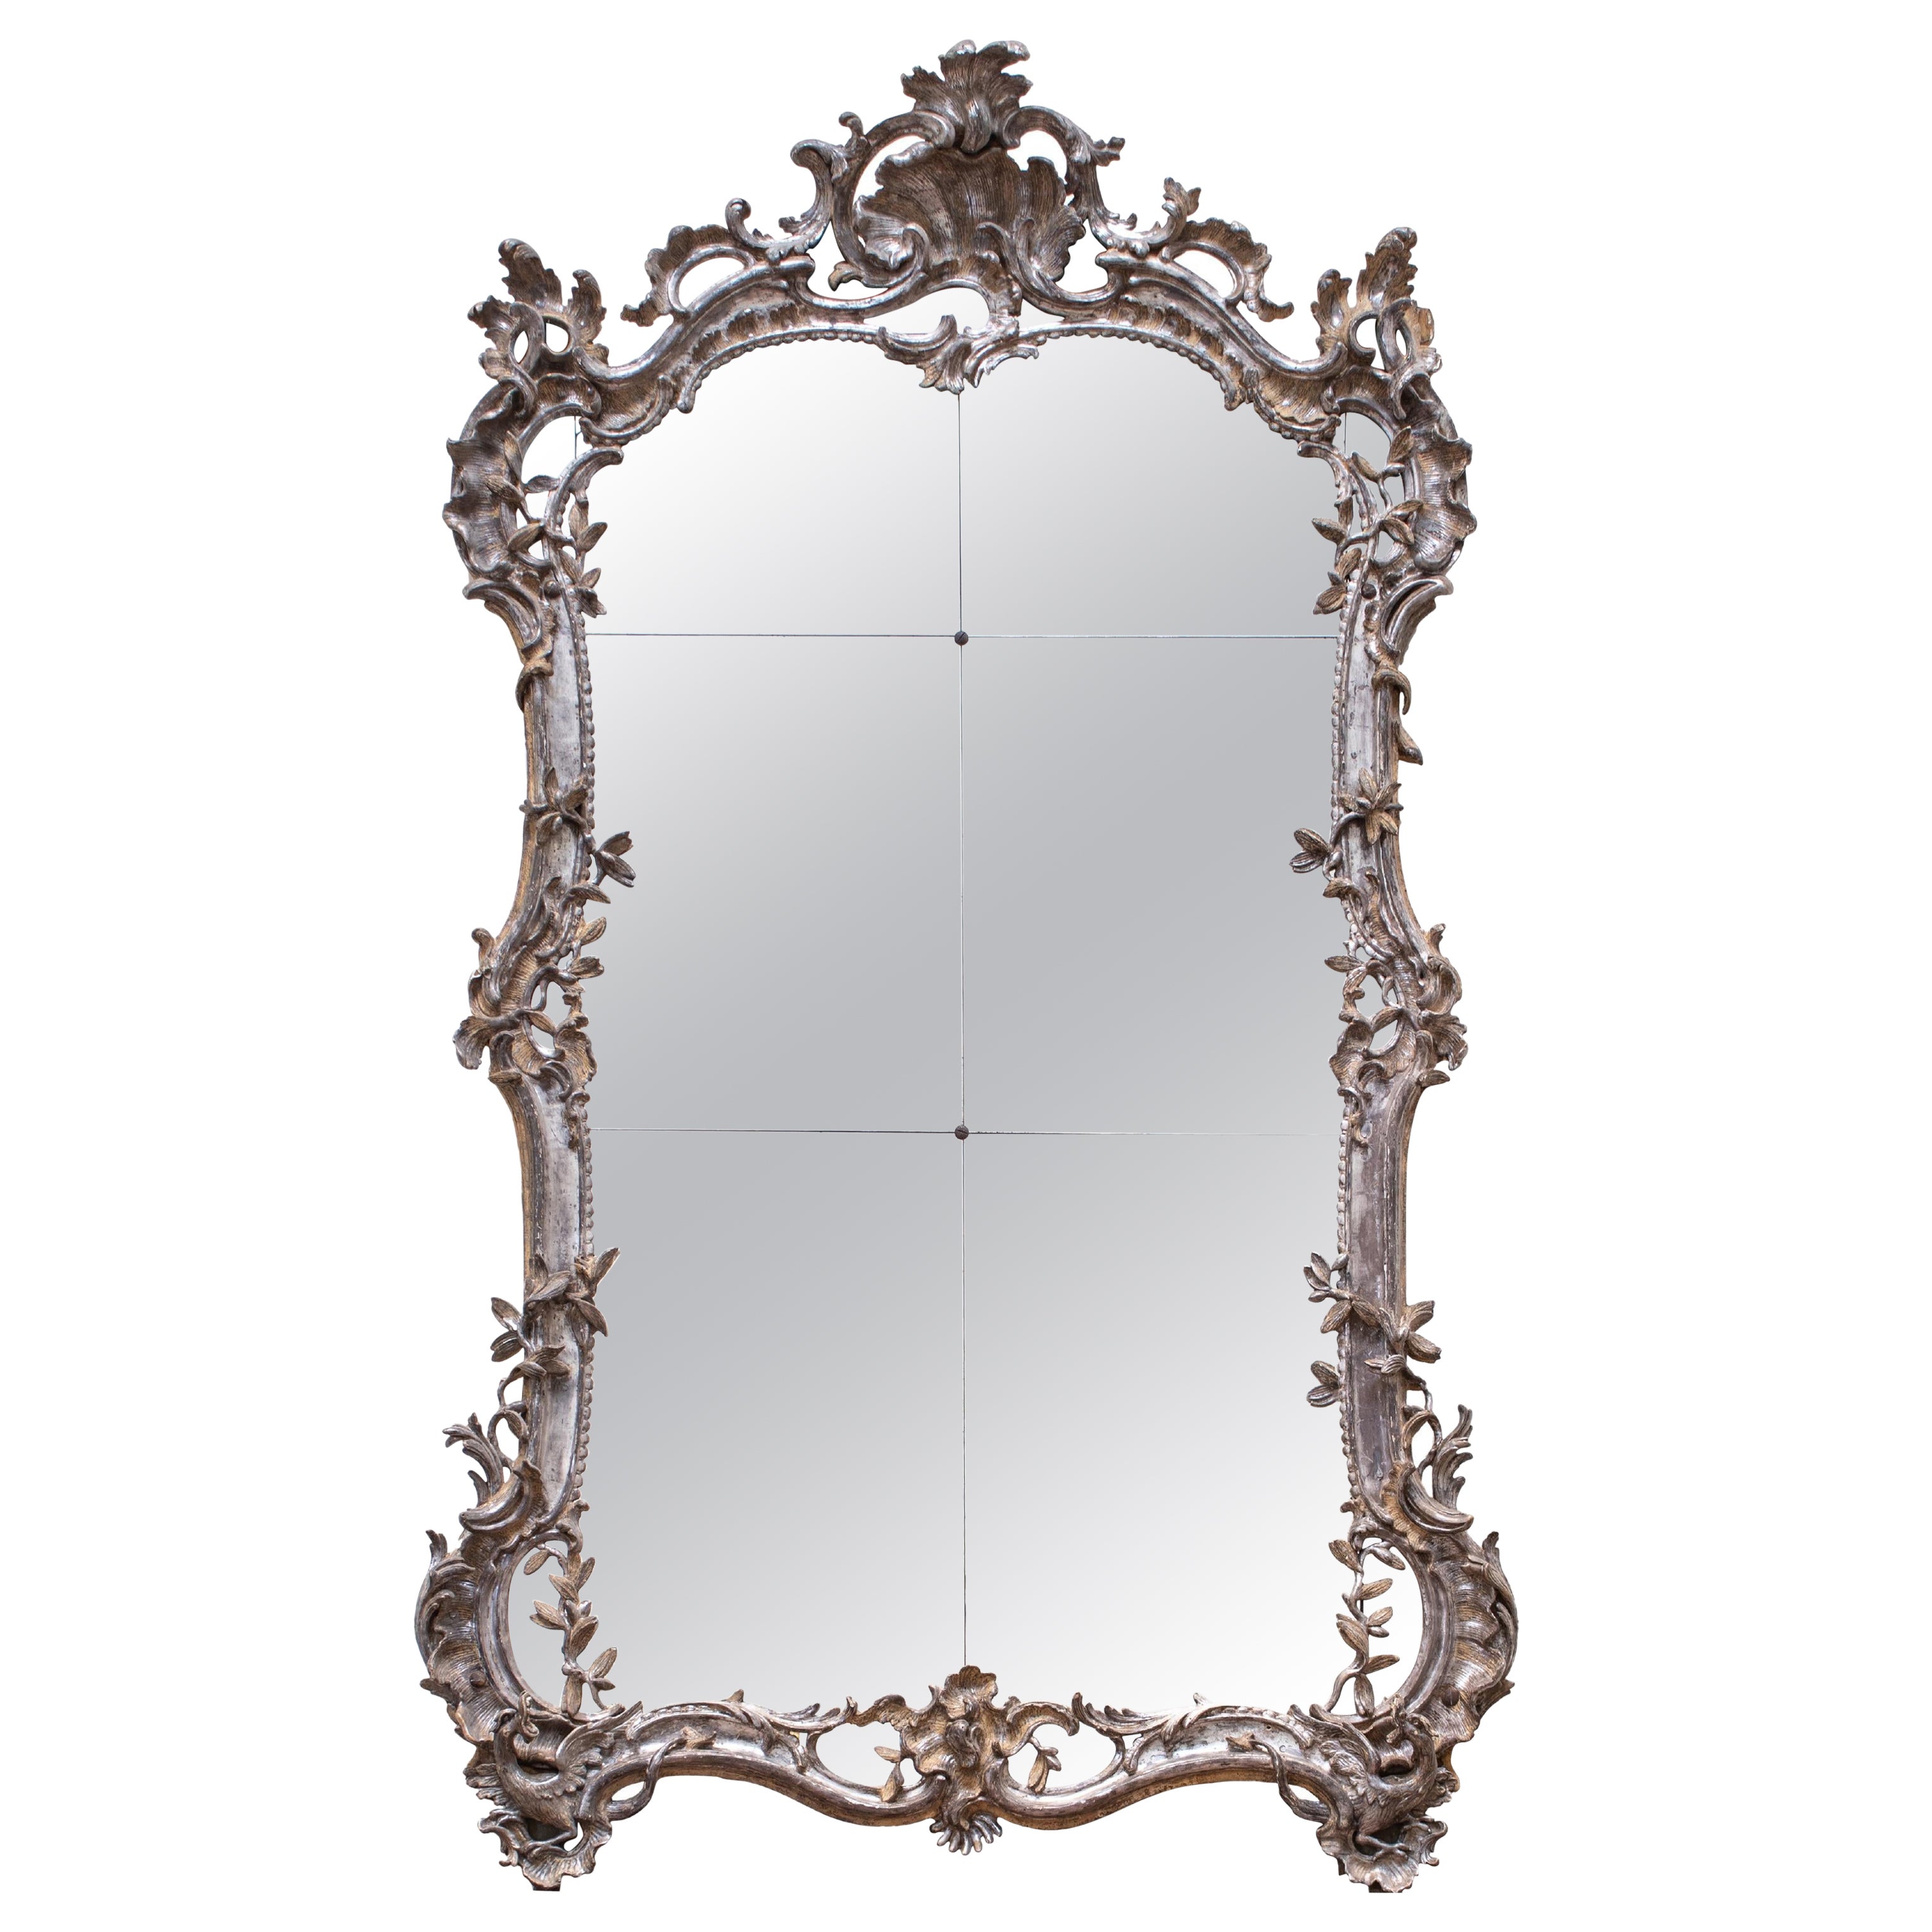 Mid-18th Century Silvered Wood Carved Mirror in Rococo Style